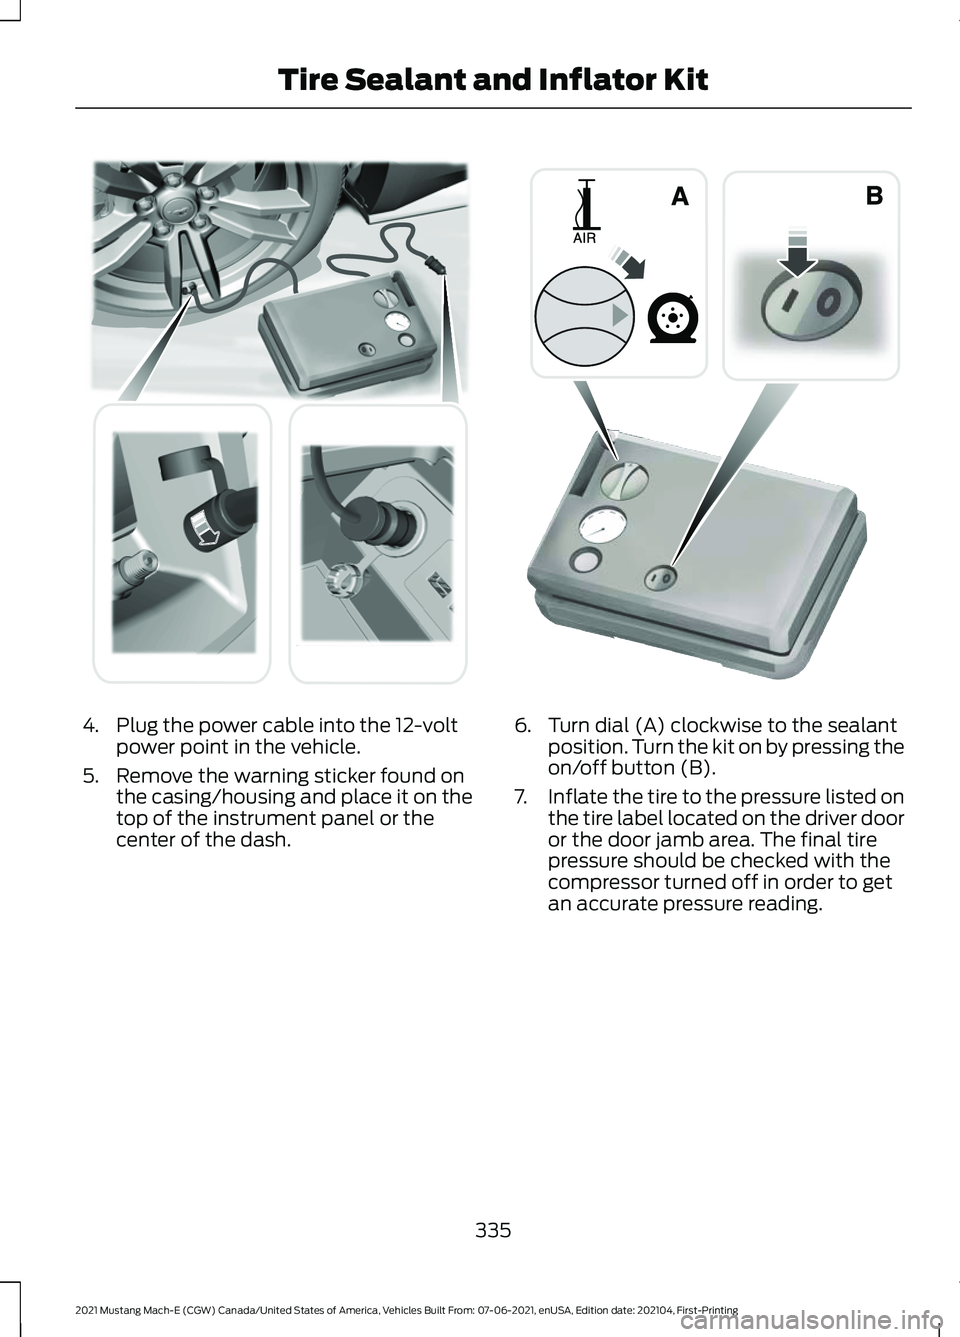 FORD MUSTANG MACH-E 2021  Owners Manual 4. Plug the power cable into the 12-volt
power point in the vehicle.
5. Remove the warning sticker found on the casing/housing and place it on the
top of the instrument panel or the
center of the dash